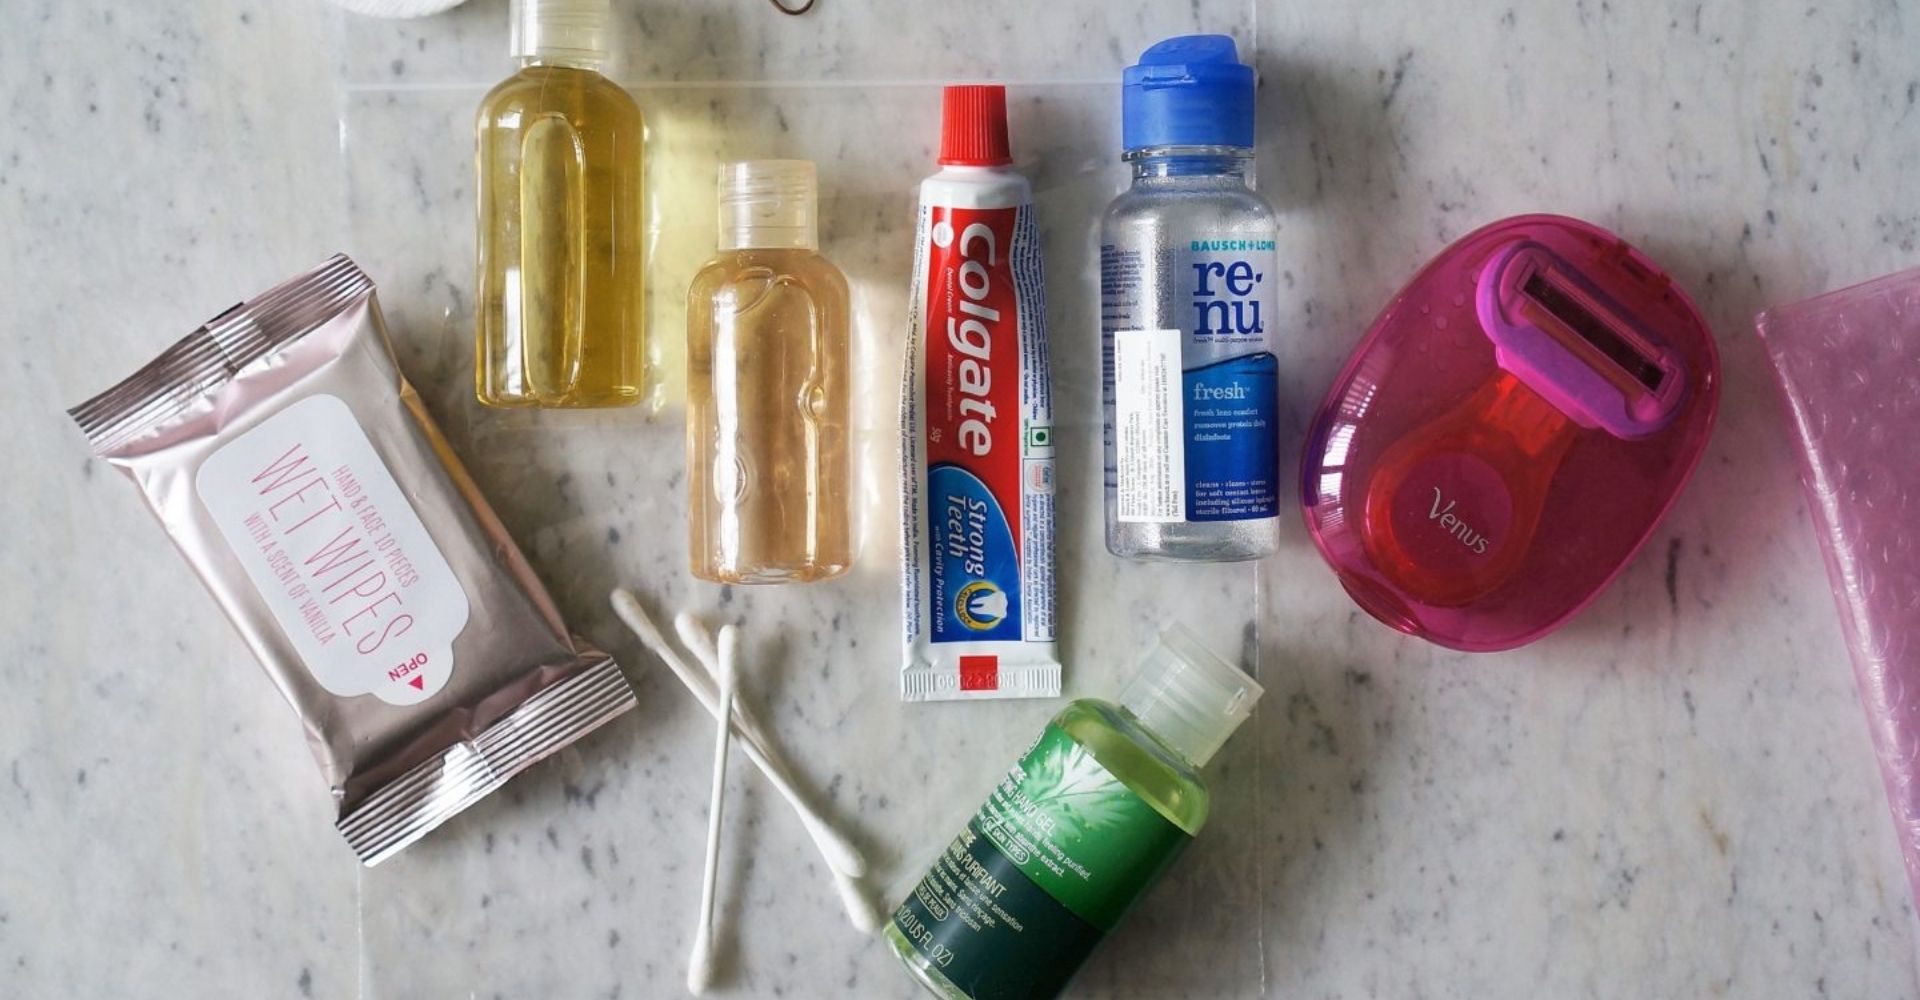 self catering holiday packing list - toiletries